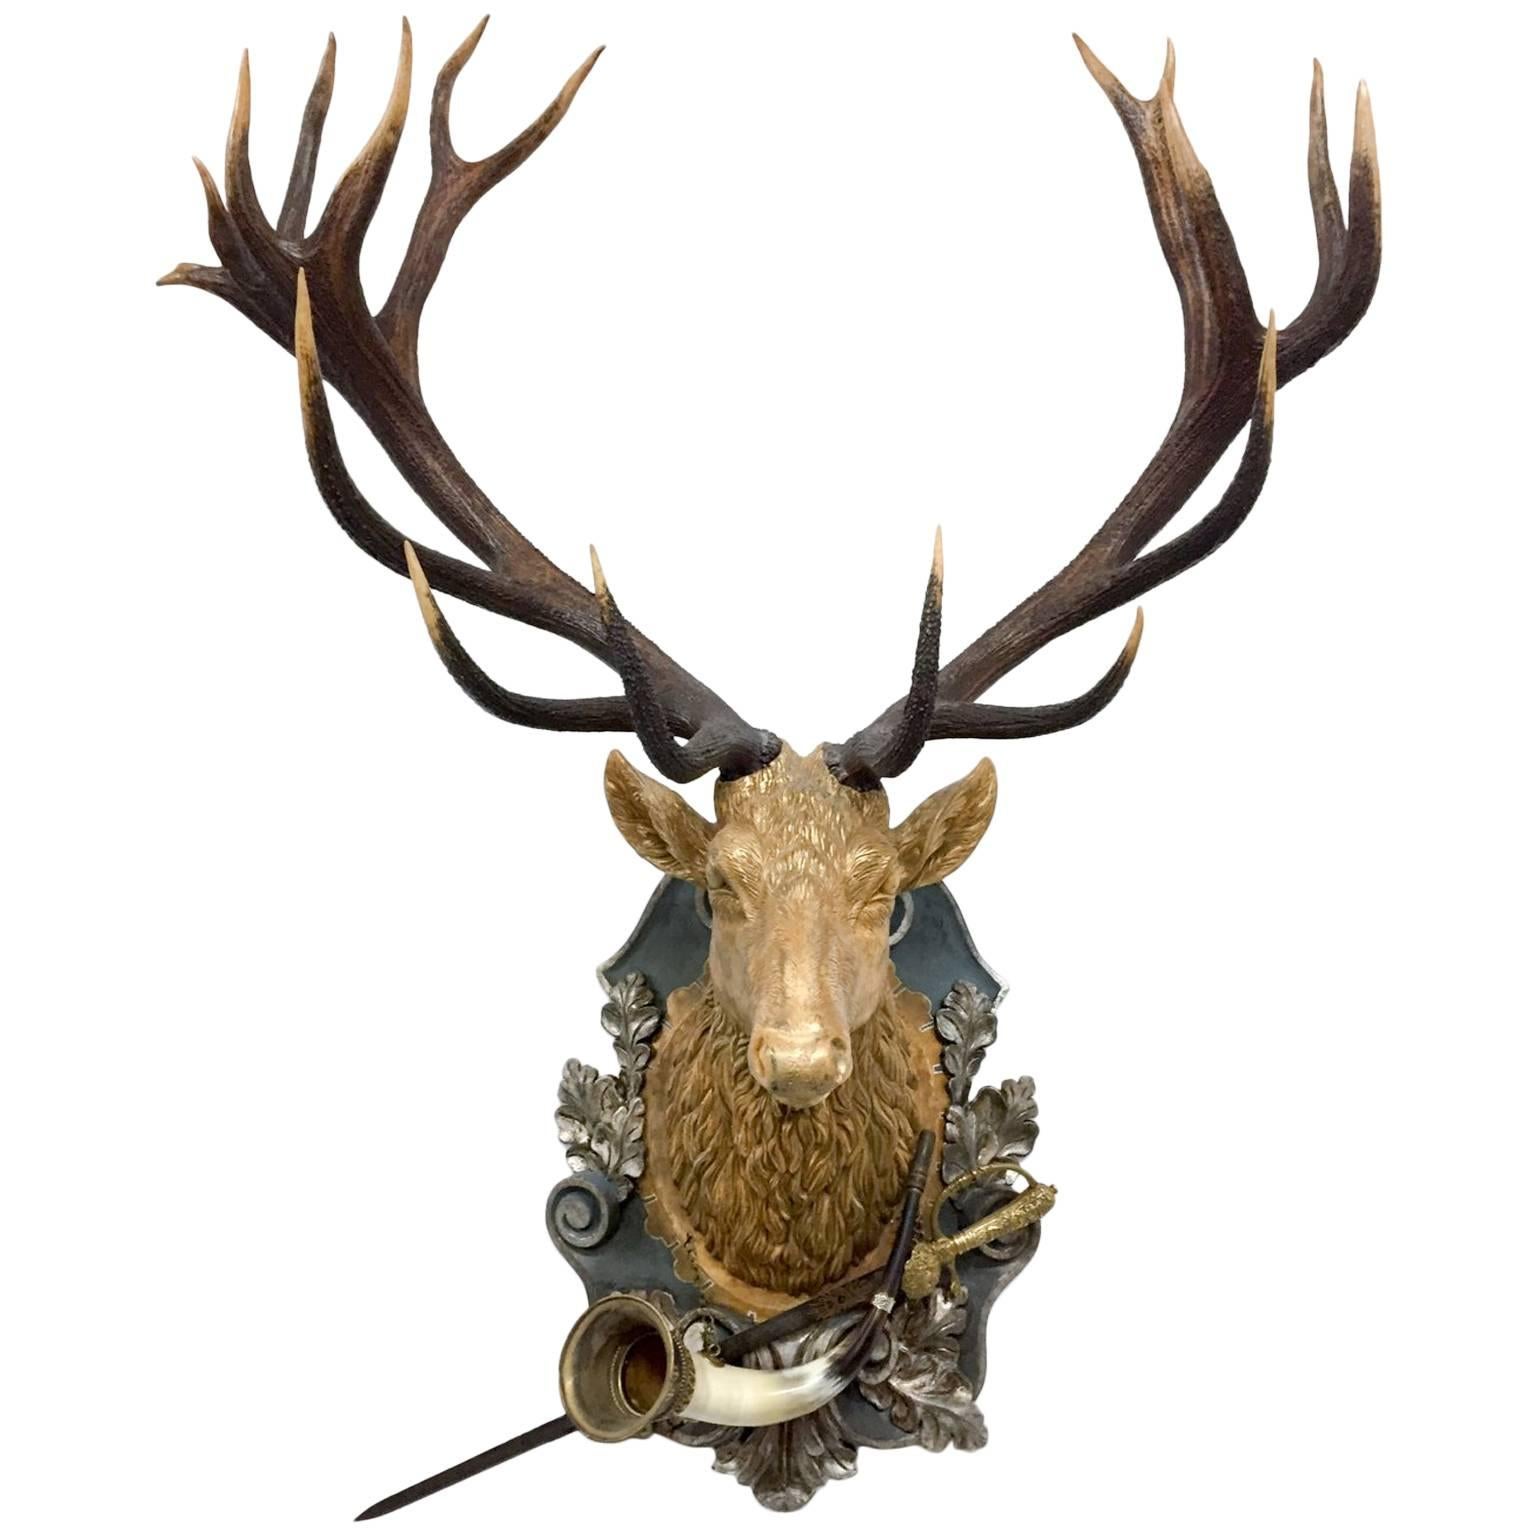 19th Century Habsburg Red Stag Trophy with Hunt Horn & Hunt Sword